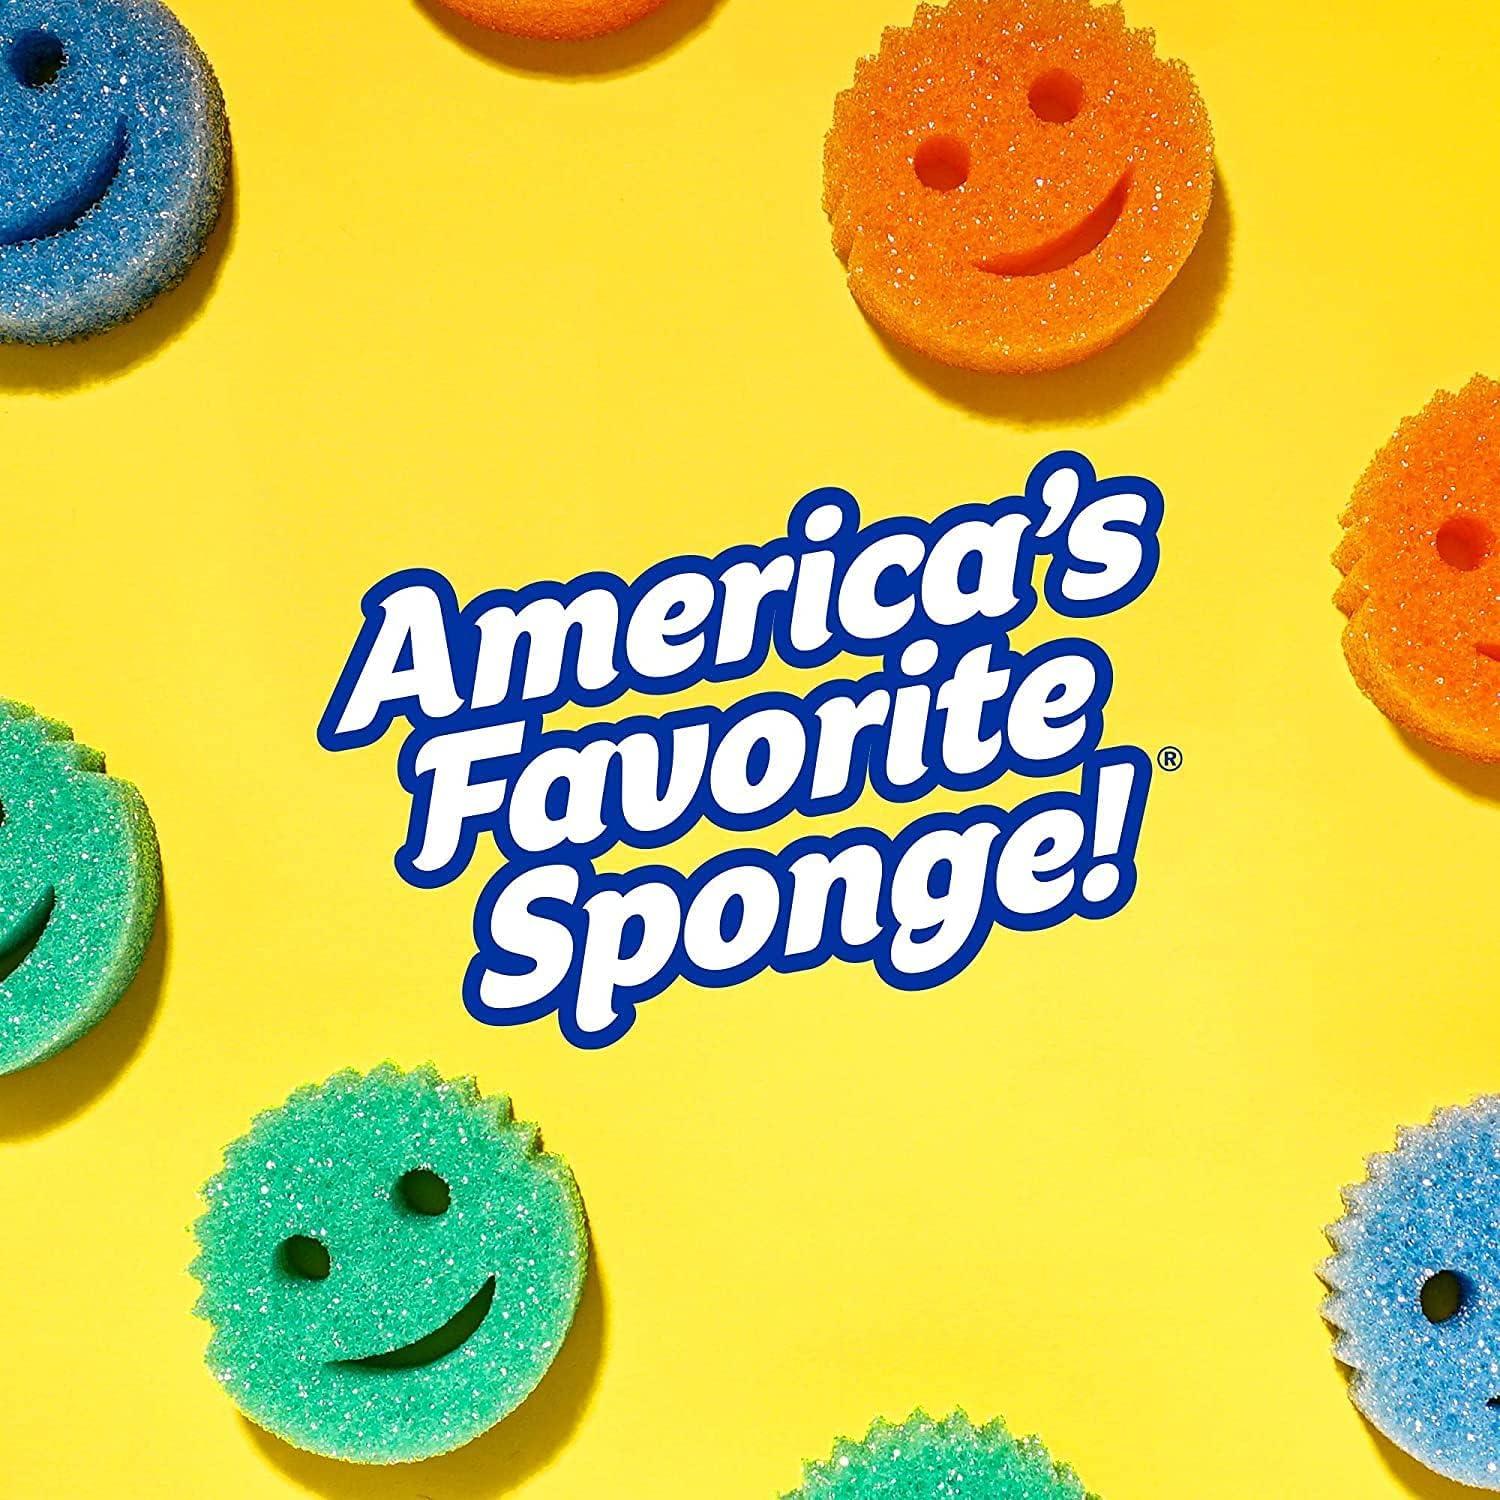 Scrub Daddy 10 pc Variety Lemon Lime Scented Sponges w